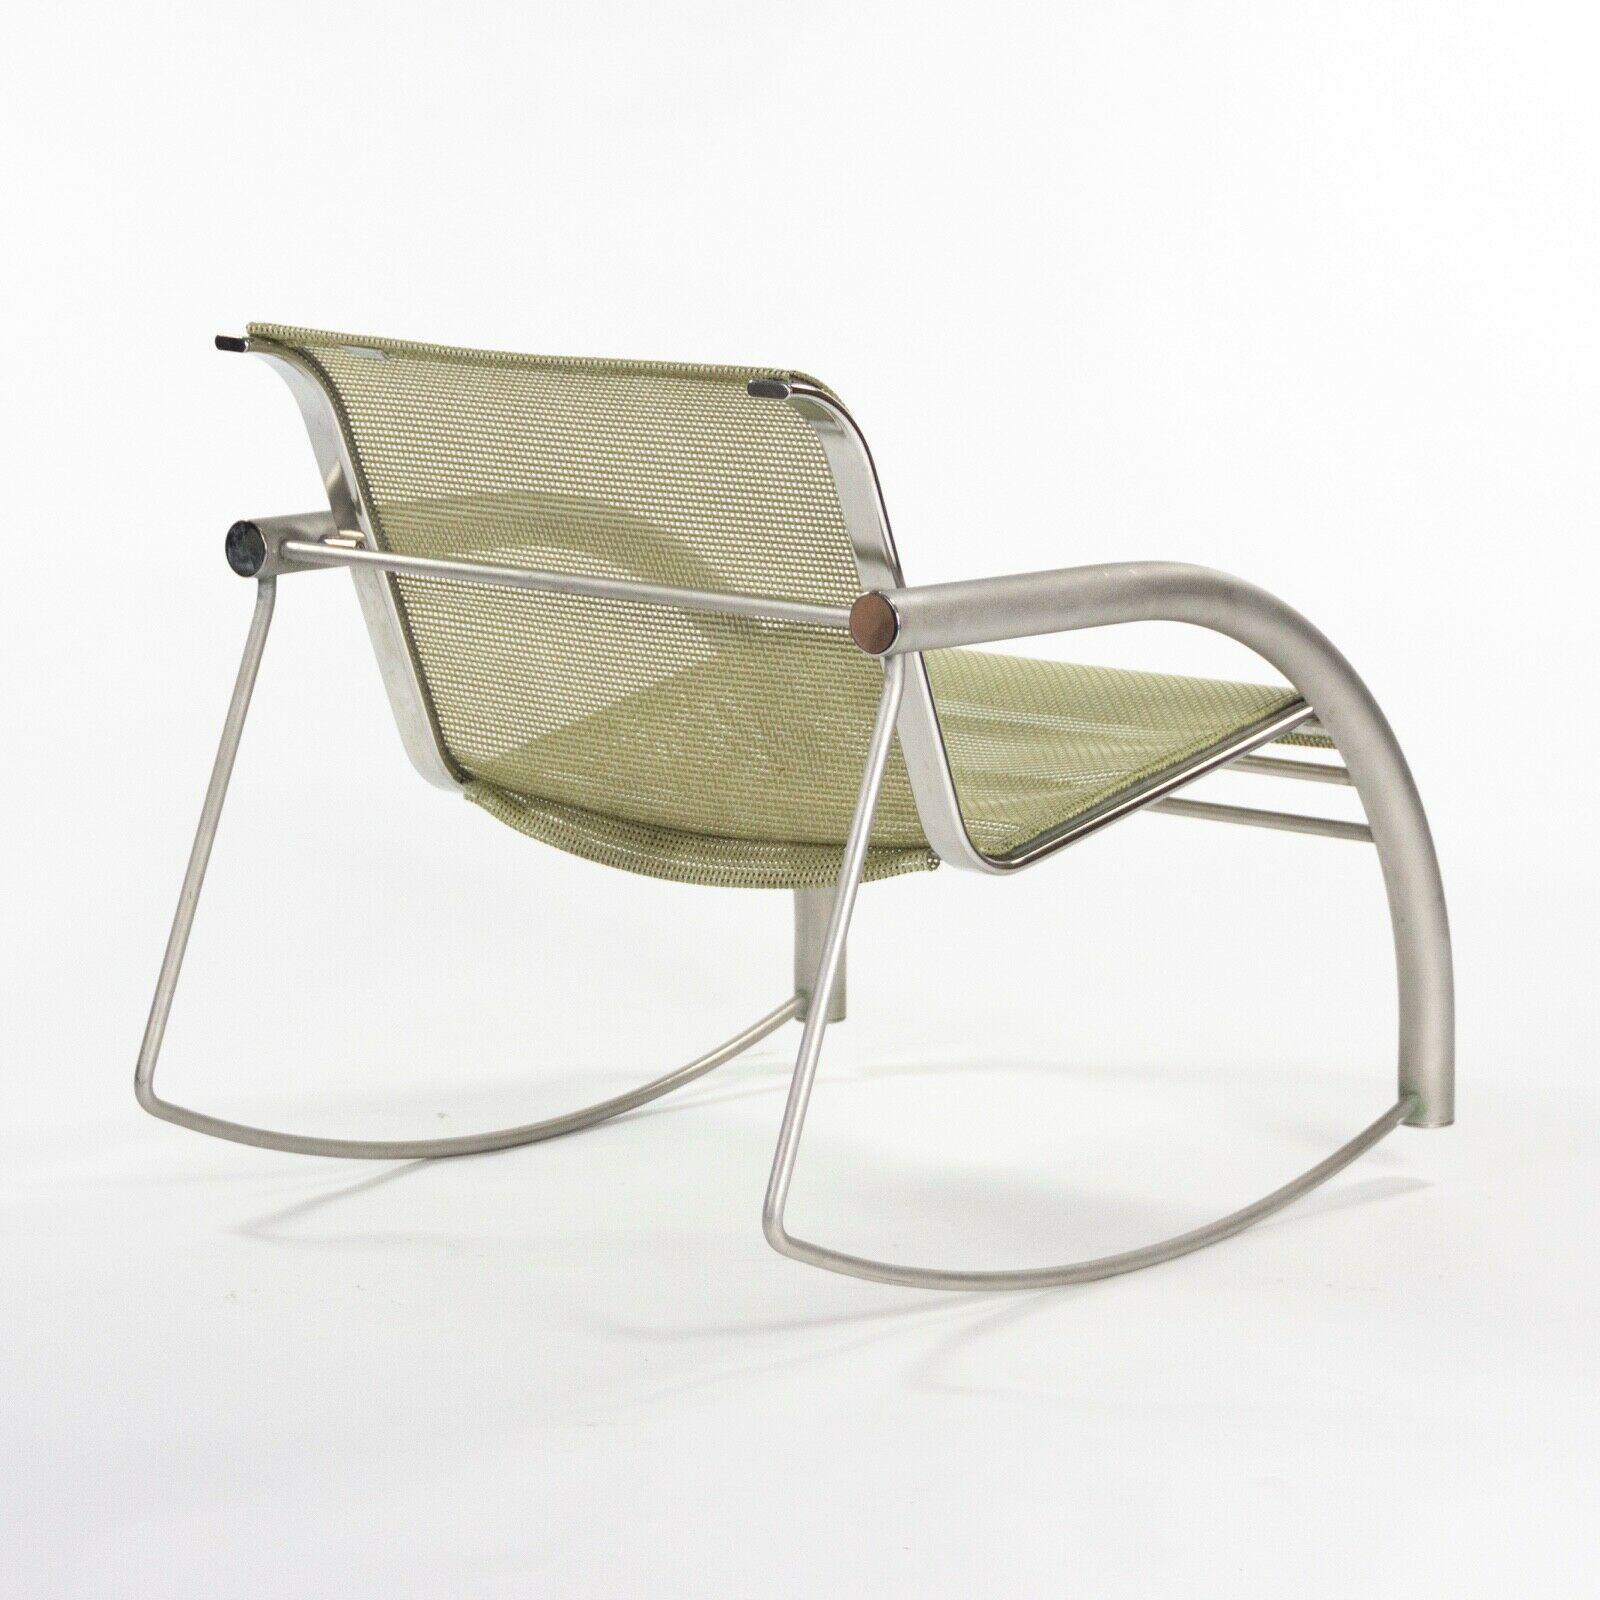 Prototype Richard Schultz 2002 Collection Stainless Steel & Mesh Rocking Chair In Good Condition For Sale In Philadelphia, PA